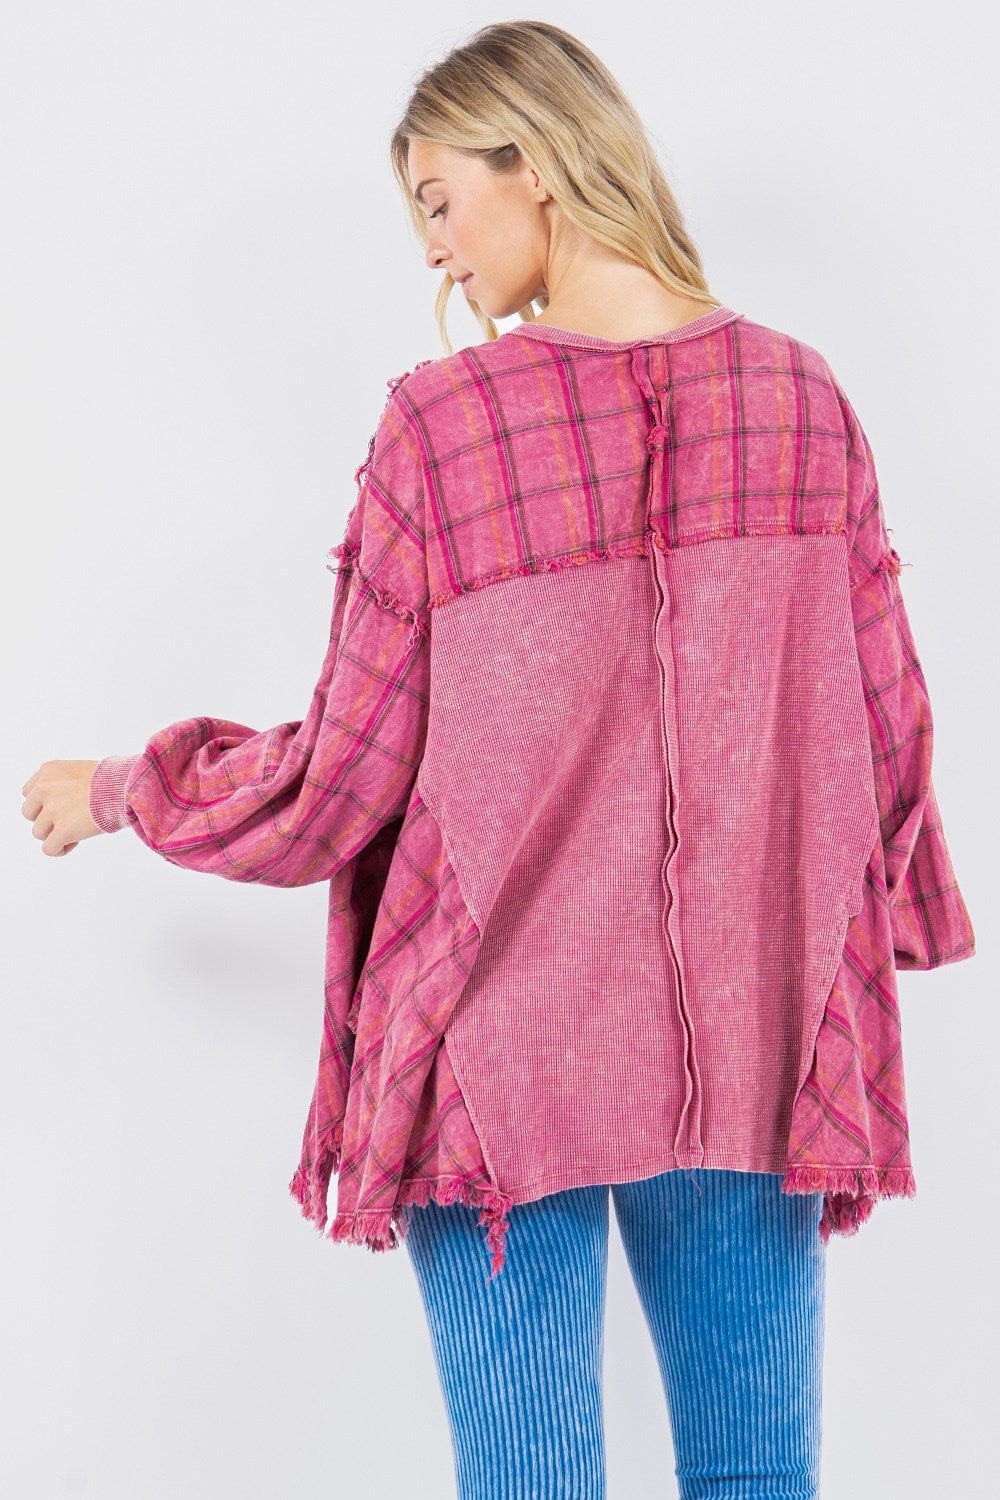 Mineral Wash Pullover with Plaid Flannel